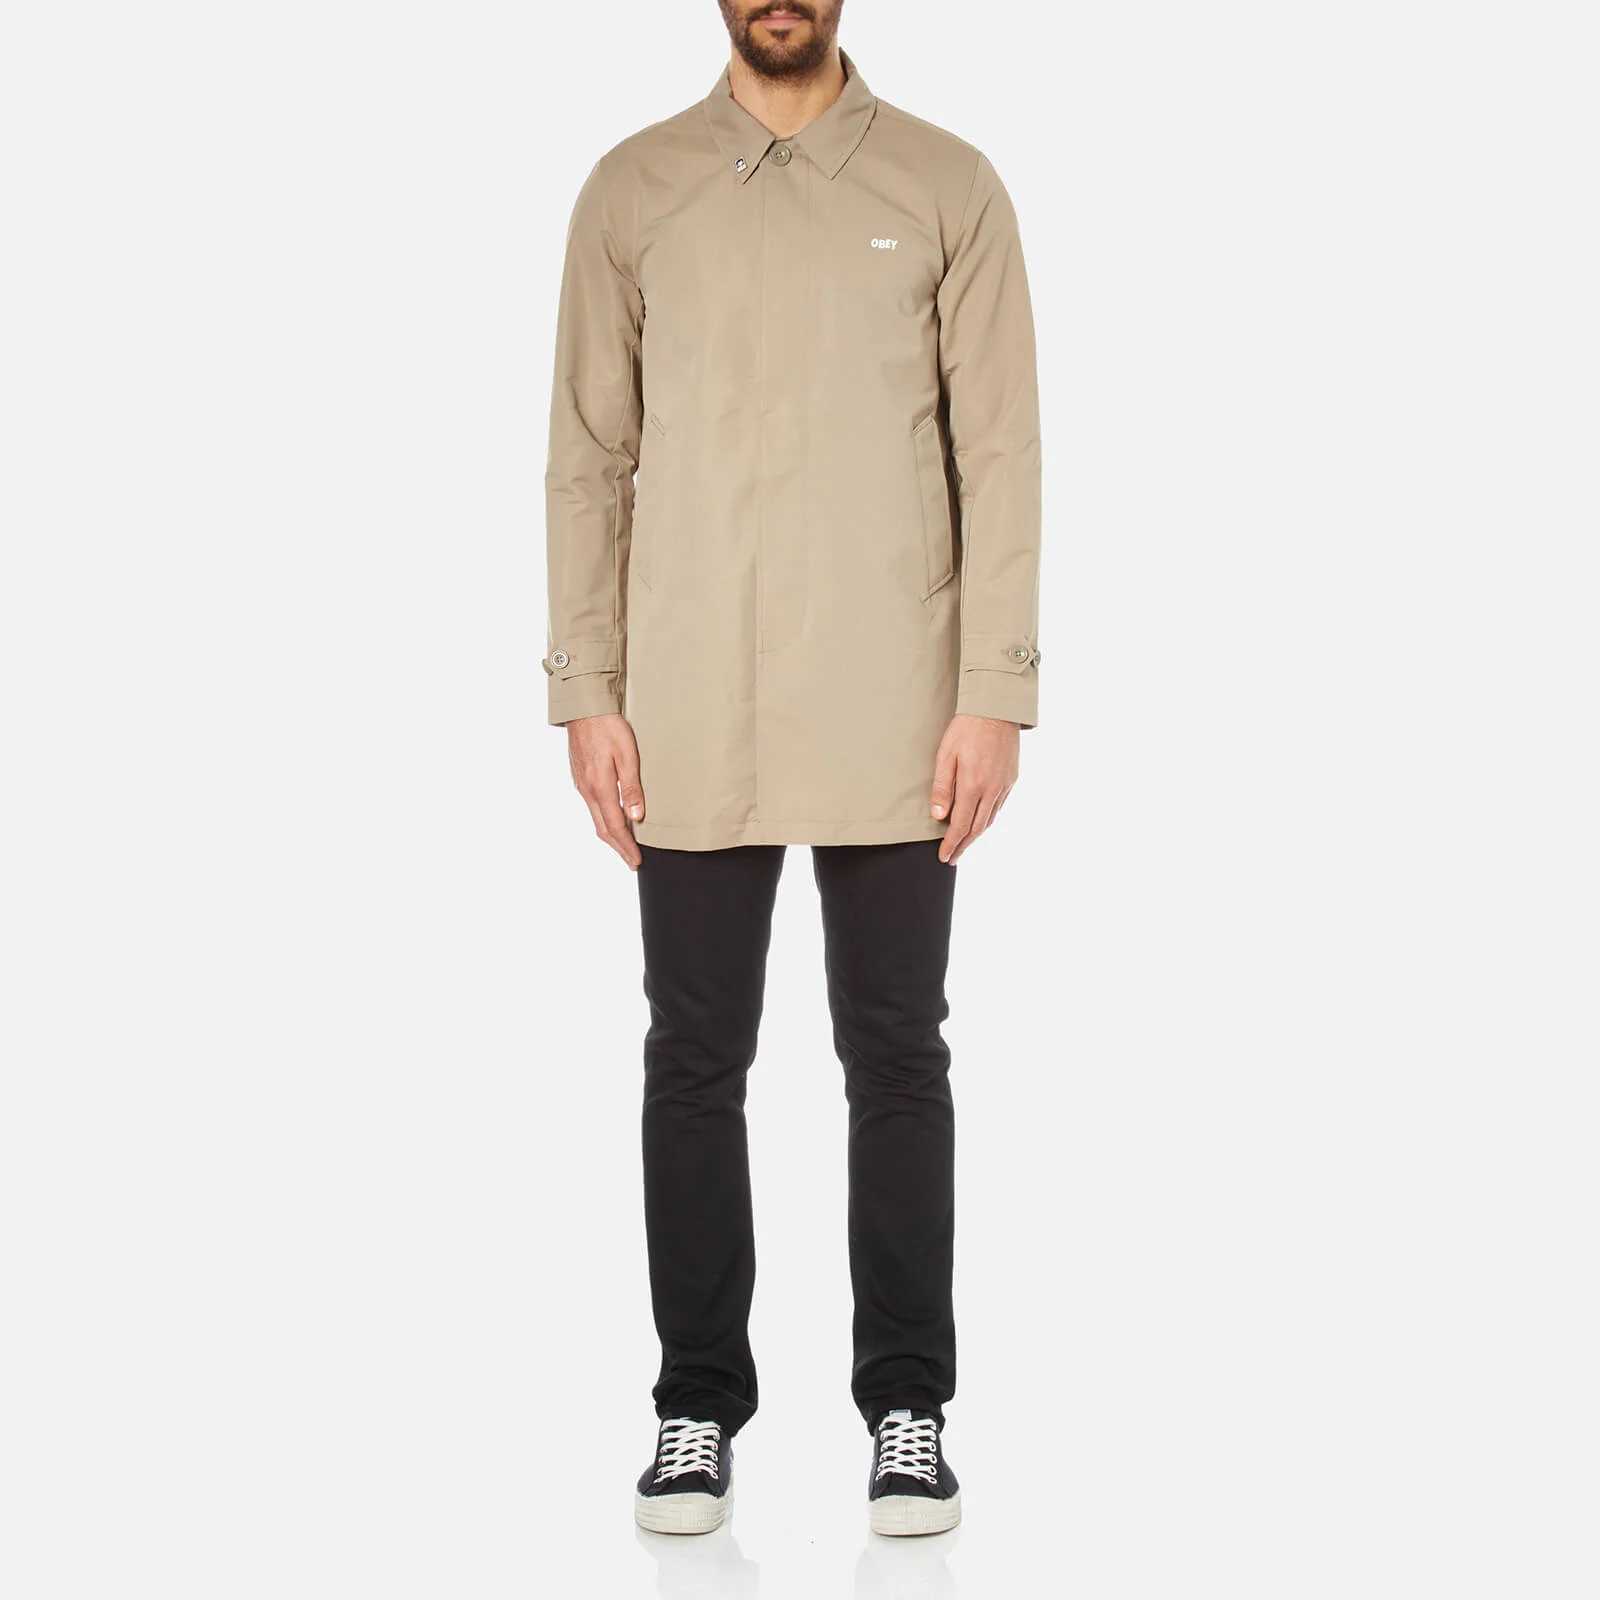 OBEY Clothing Men's Sneaky Trench Coat - Tan Image 1